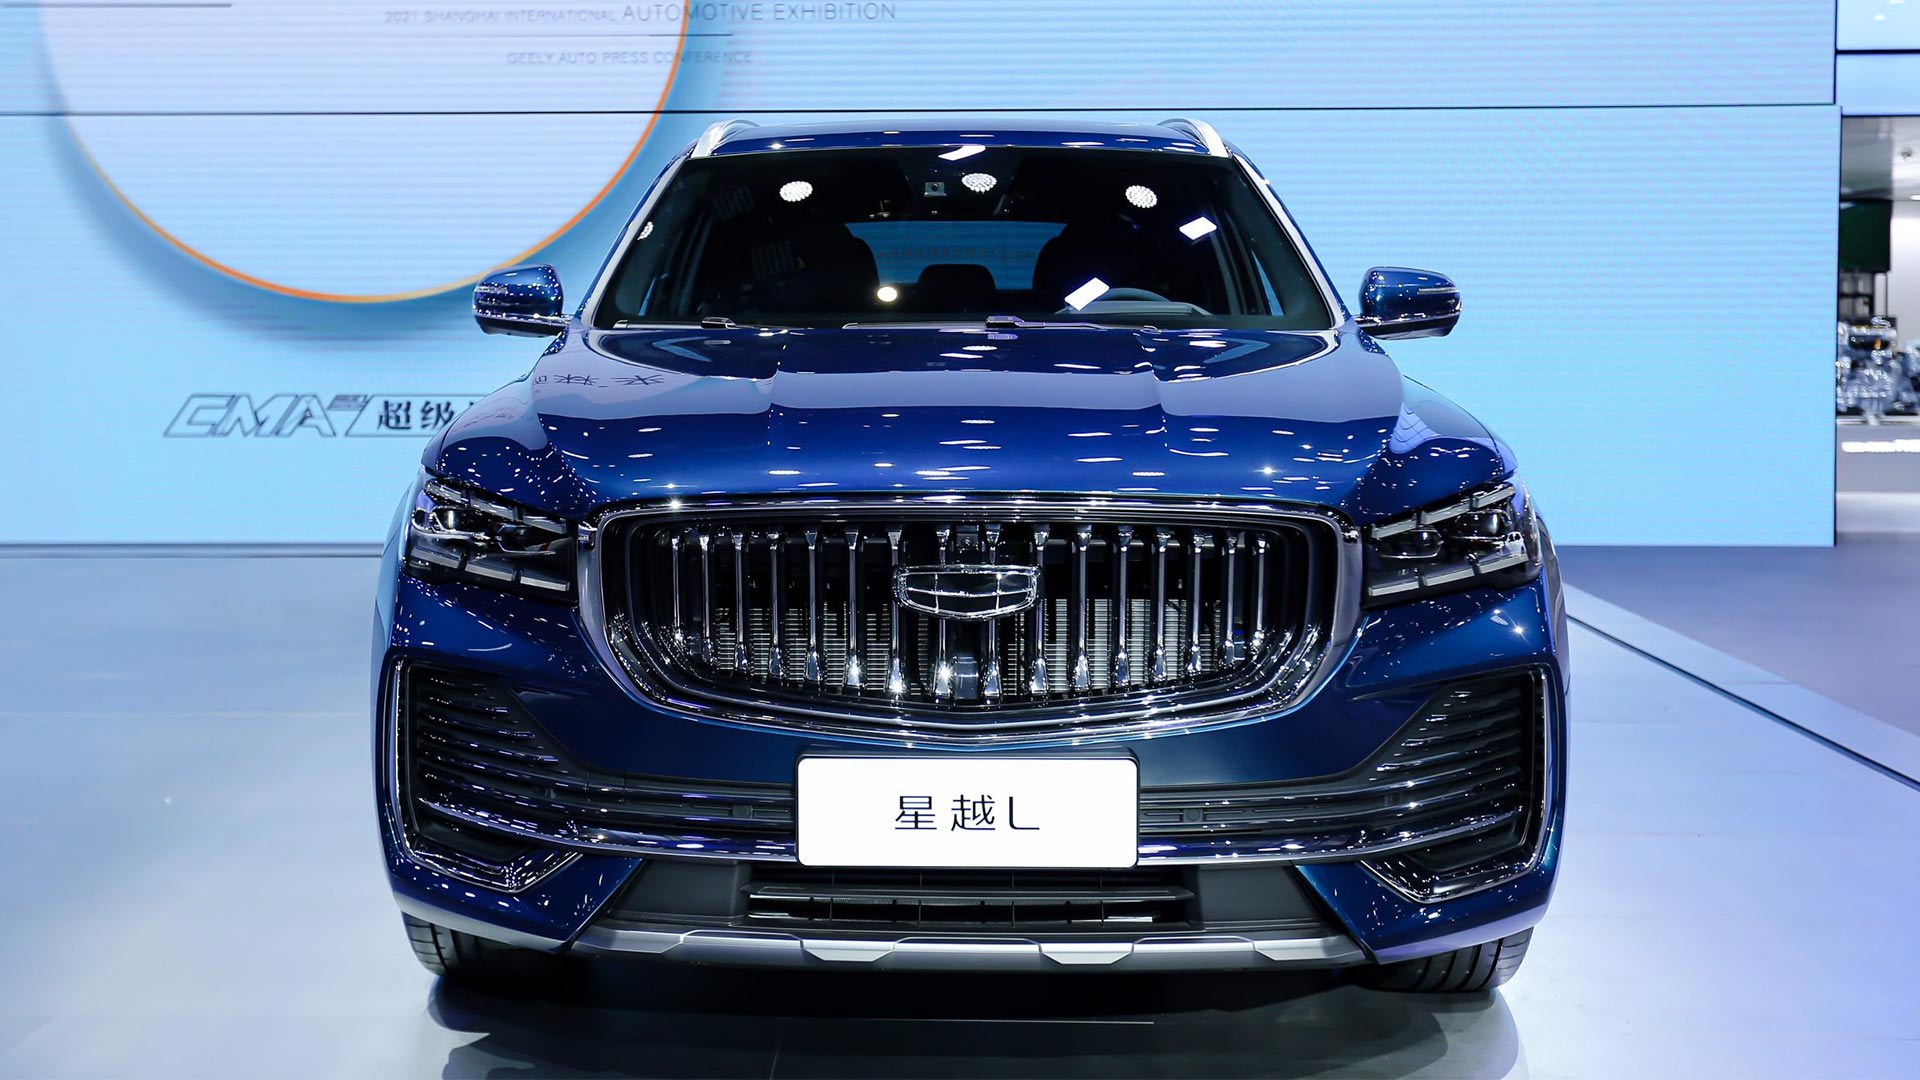 The Geely Xingyue L